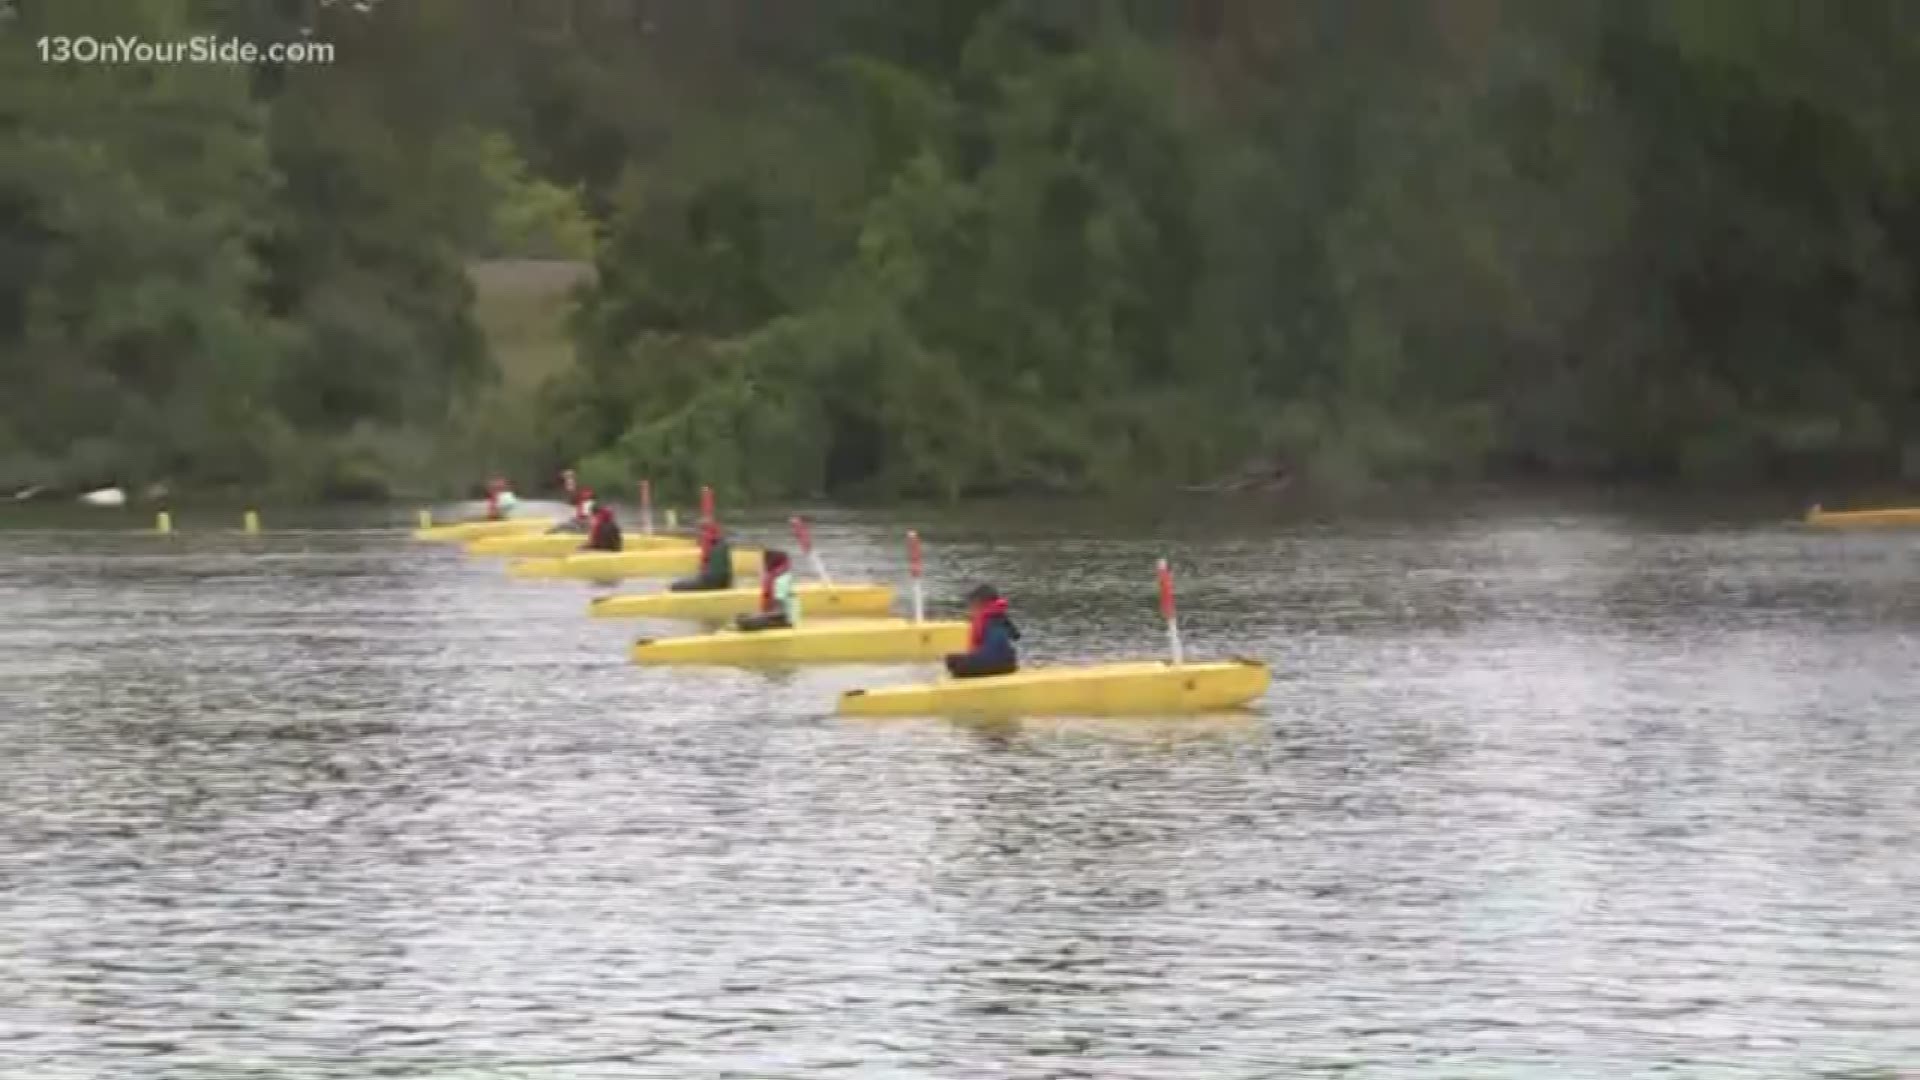 Happening right now, the 2019 US Rowing Masters National Championship!  It's taking place in Grand Rapids, starting Thursday, at Riverside Park. The competition will continue until Sunday. It includes teams from all over the country -- from California to Philadelphia.